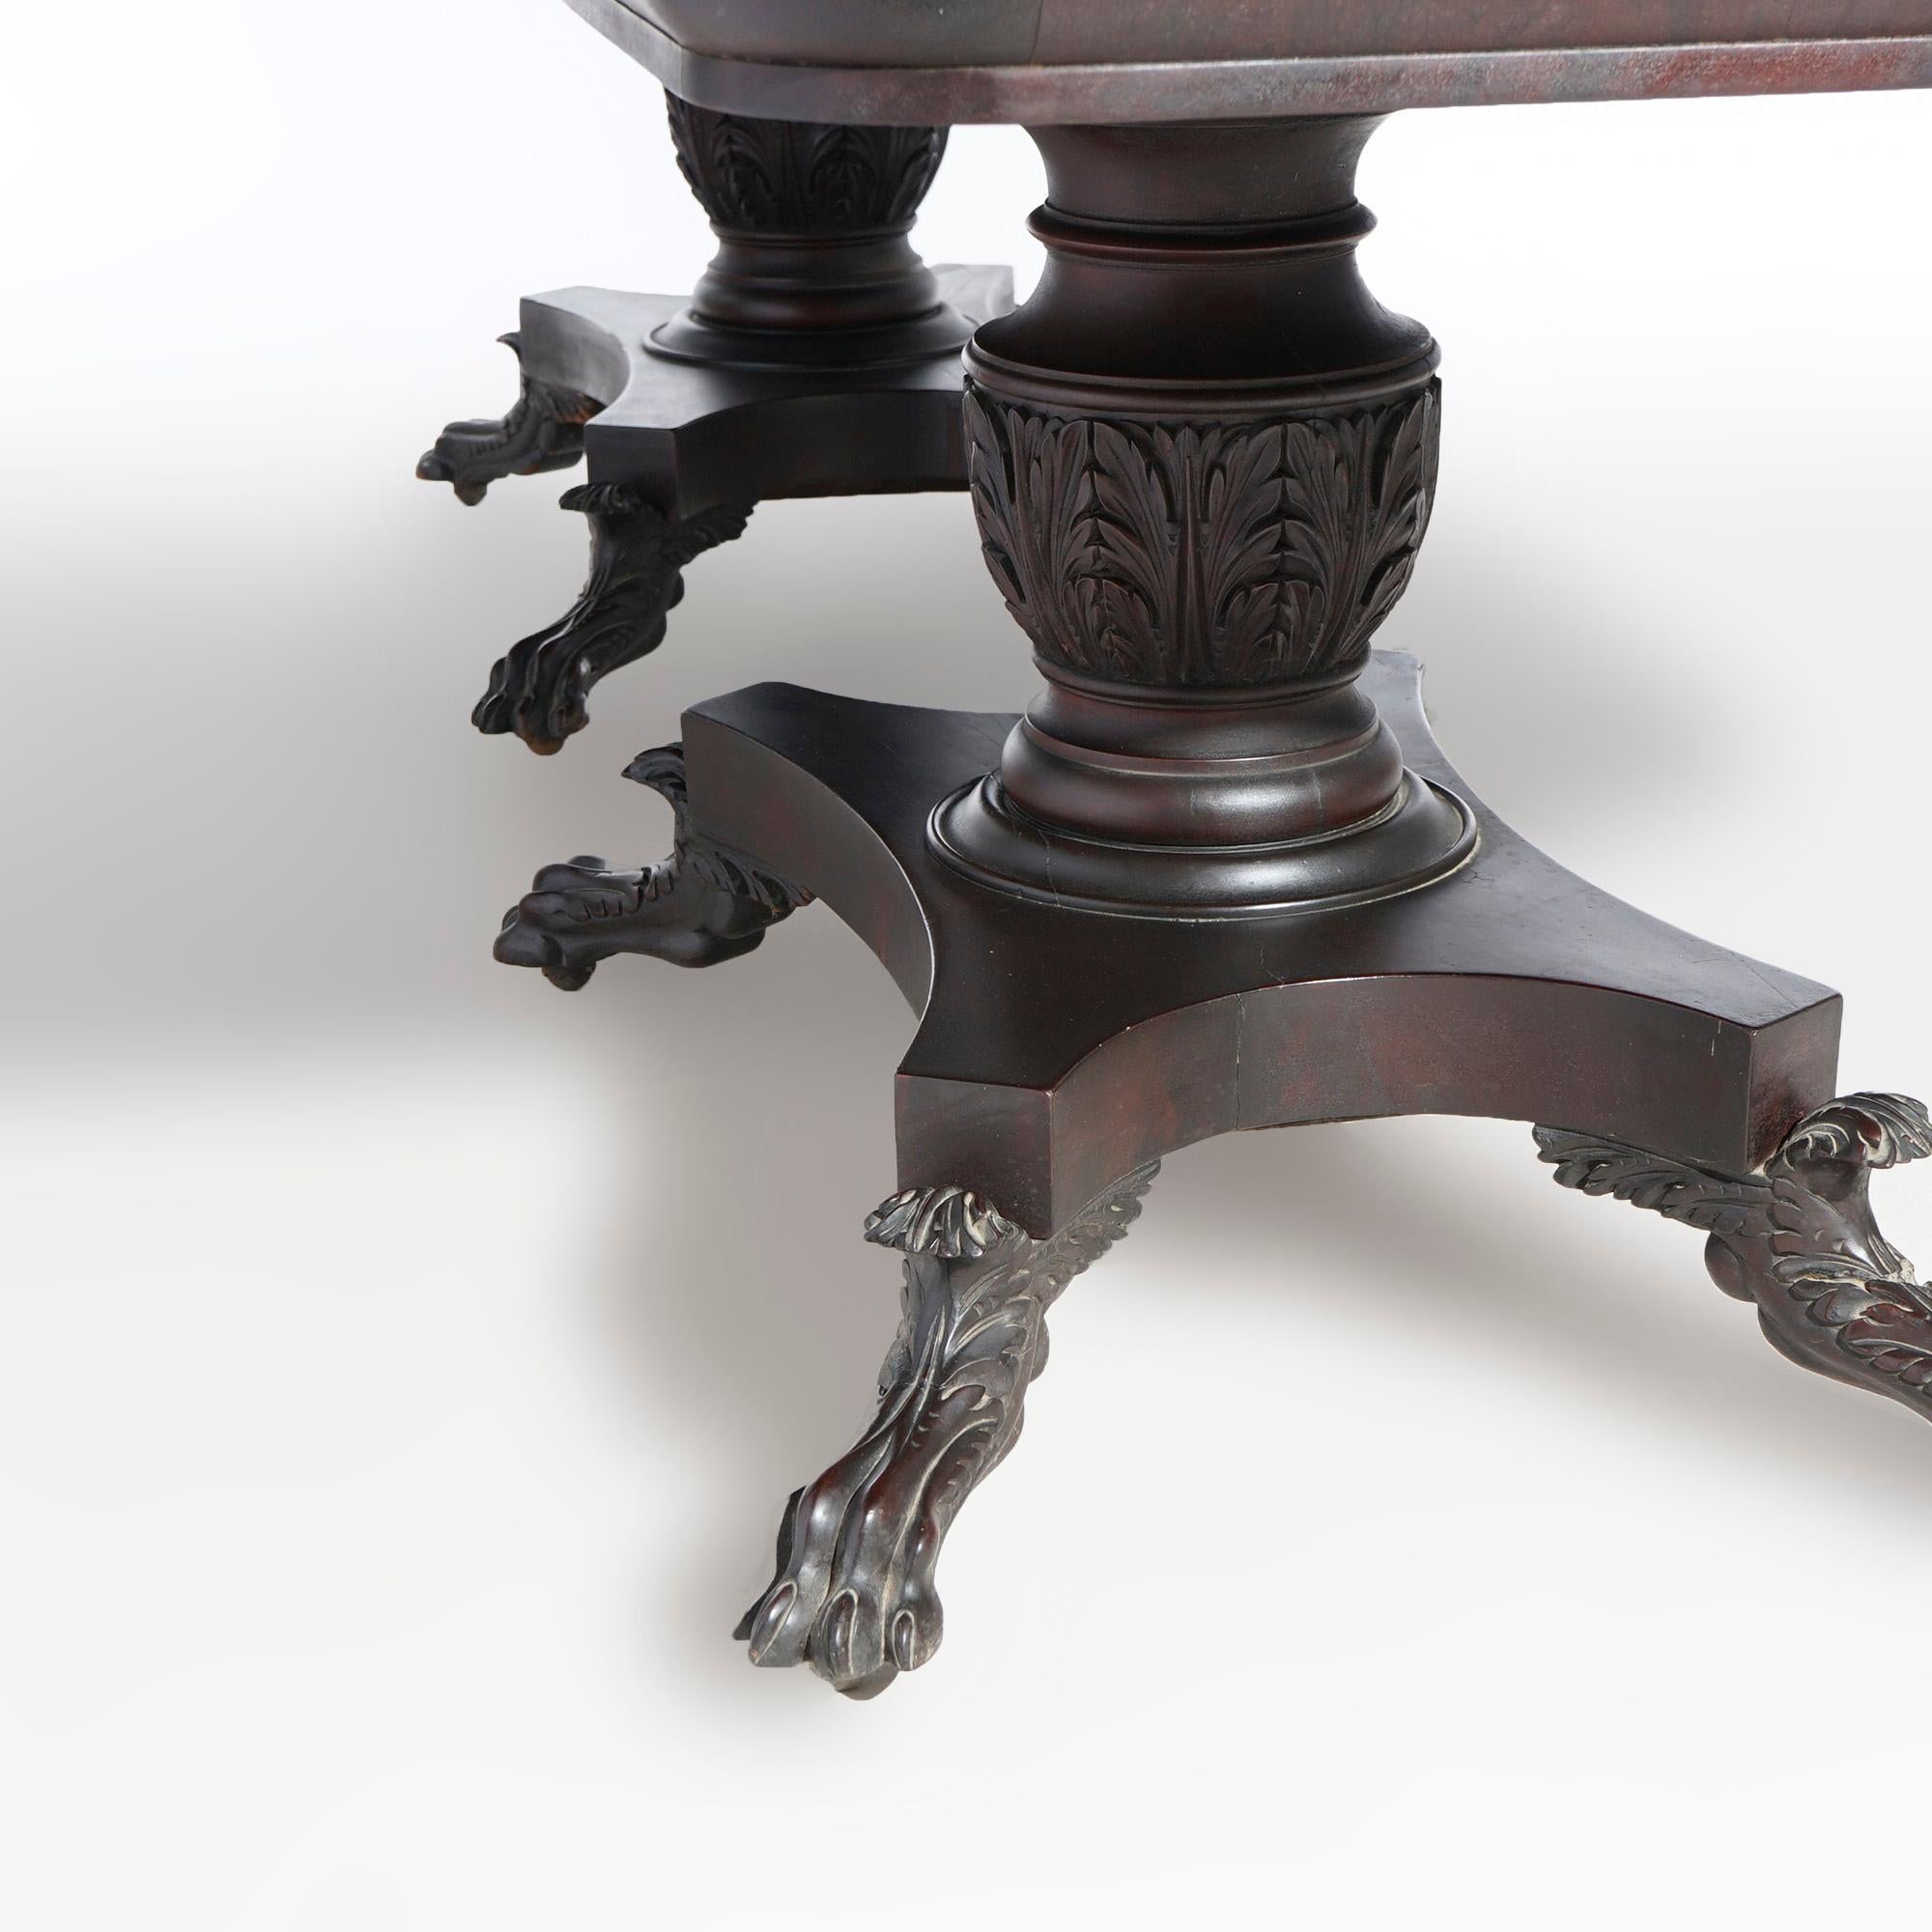 Antique American Empire Greco Flame Mahogany Double Pedestal Banquet Table c1840 For Sale 13